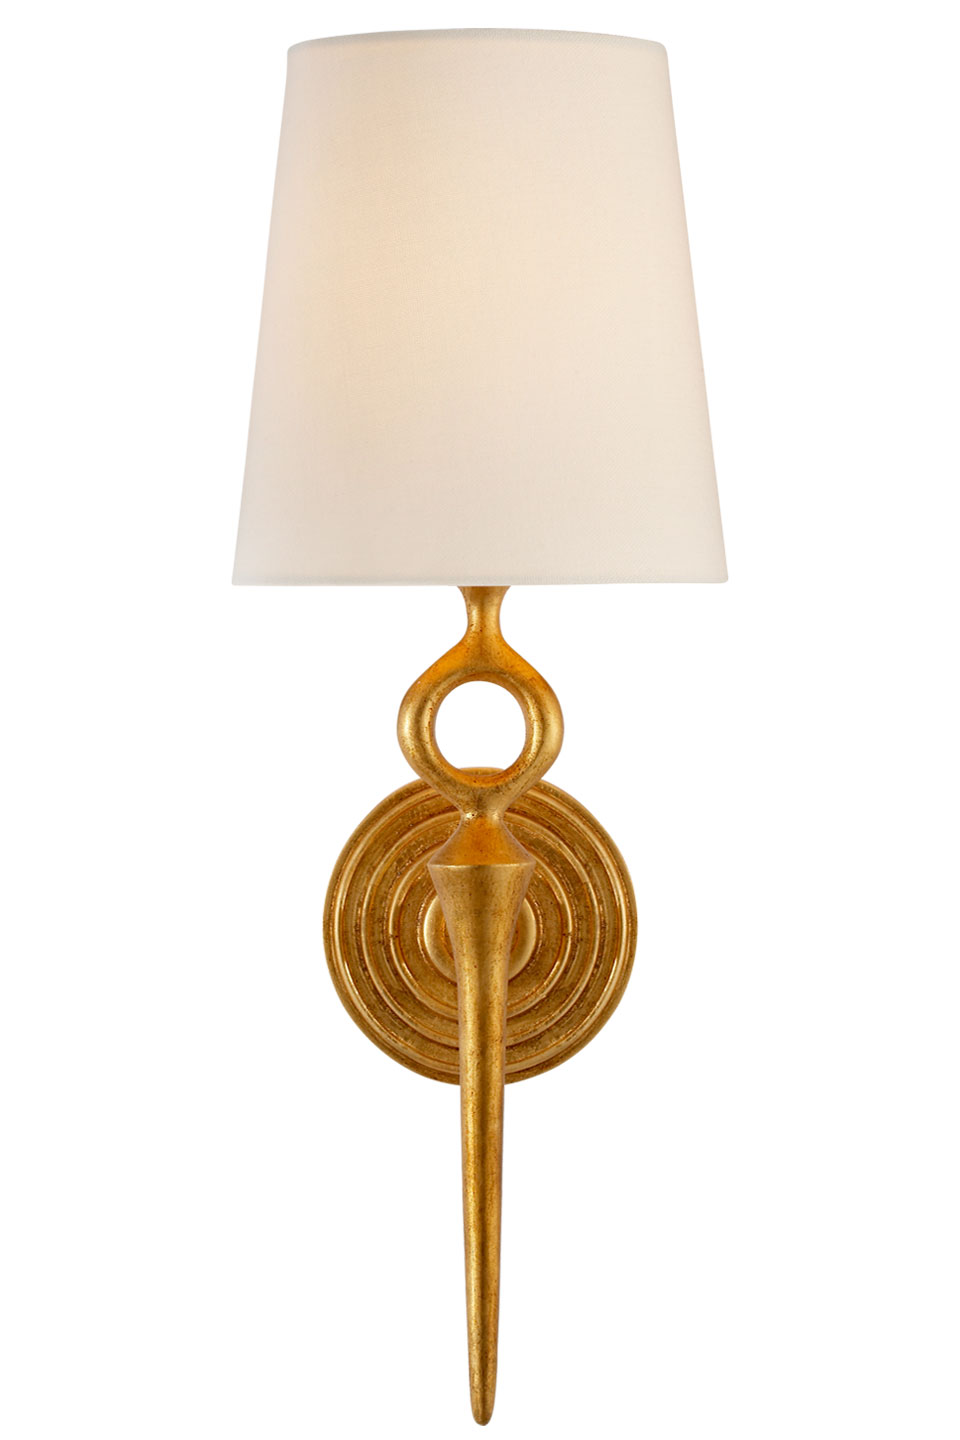 Bristol gold wall light contemporary style. Visual Comfort&Co.. 